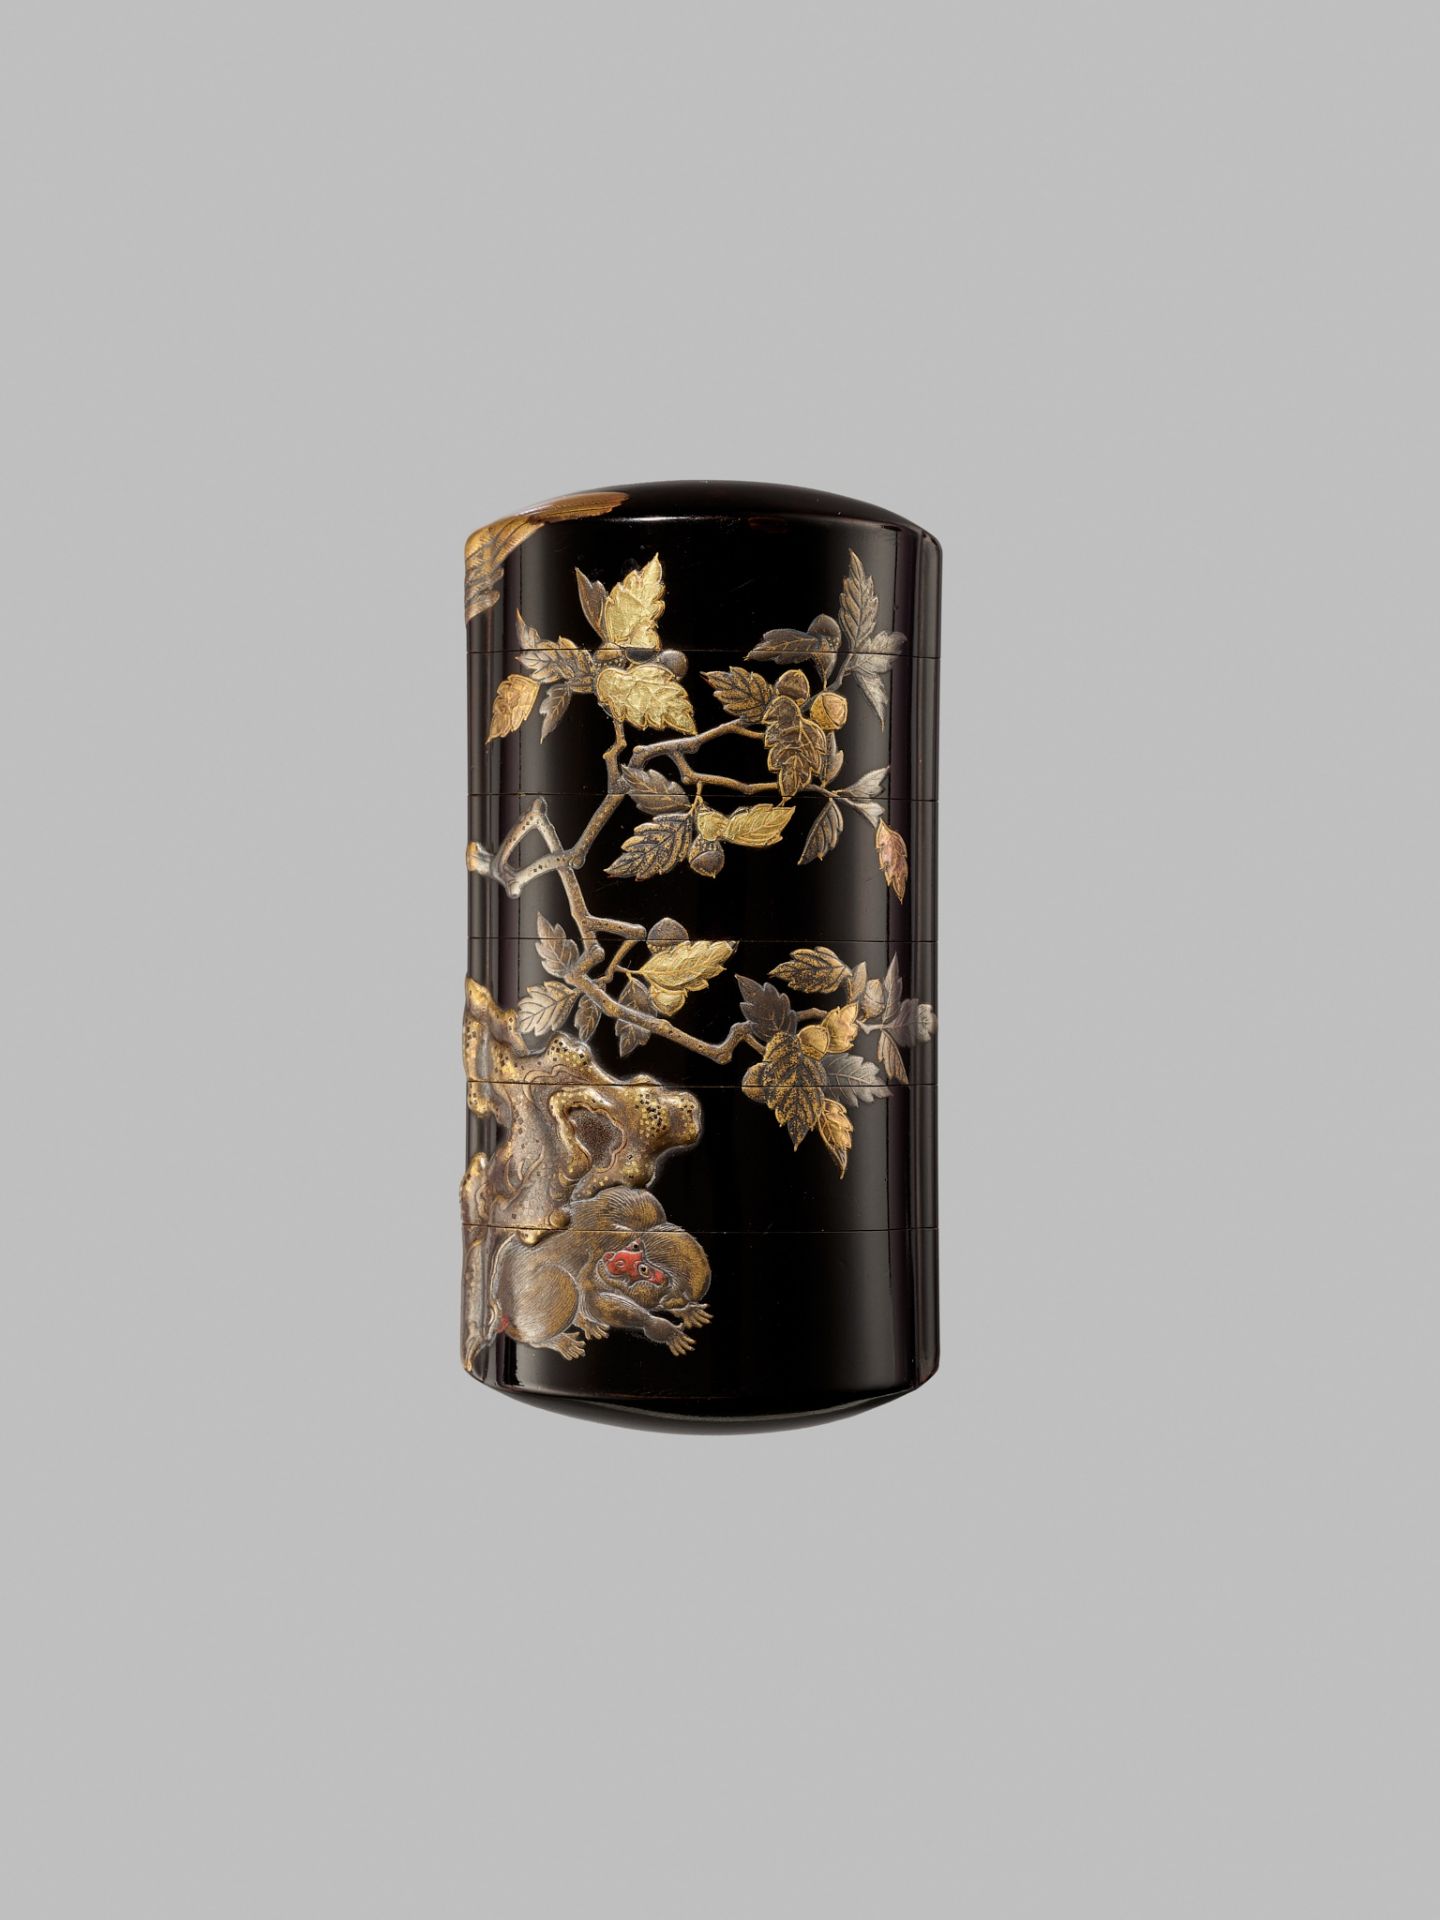 A FINE FIVE-CASE LACQUER INRO DEPICTING AN EAGLE AND MONKEY - Image 3 of 6